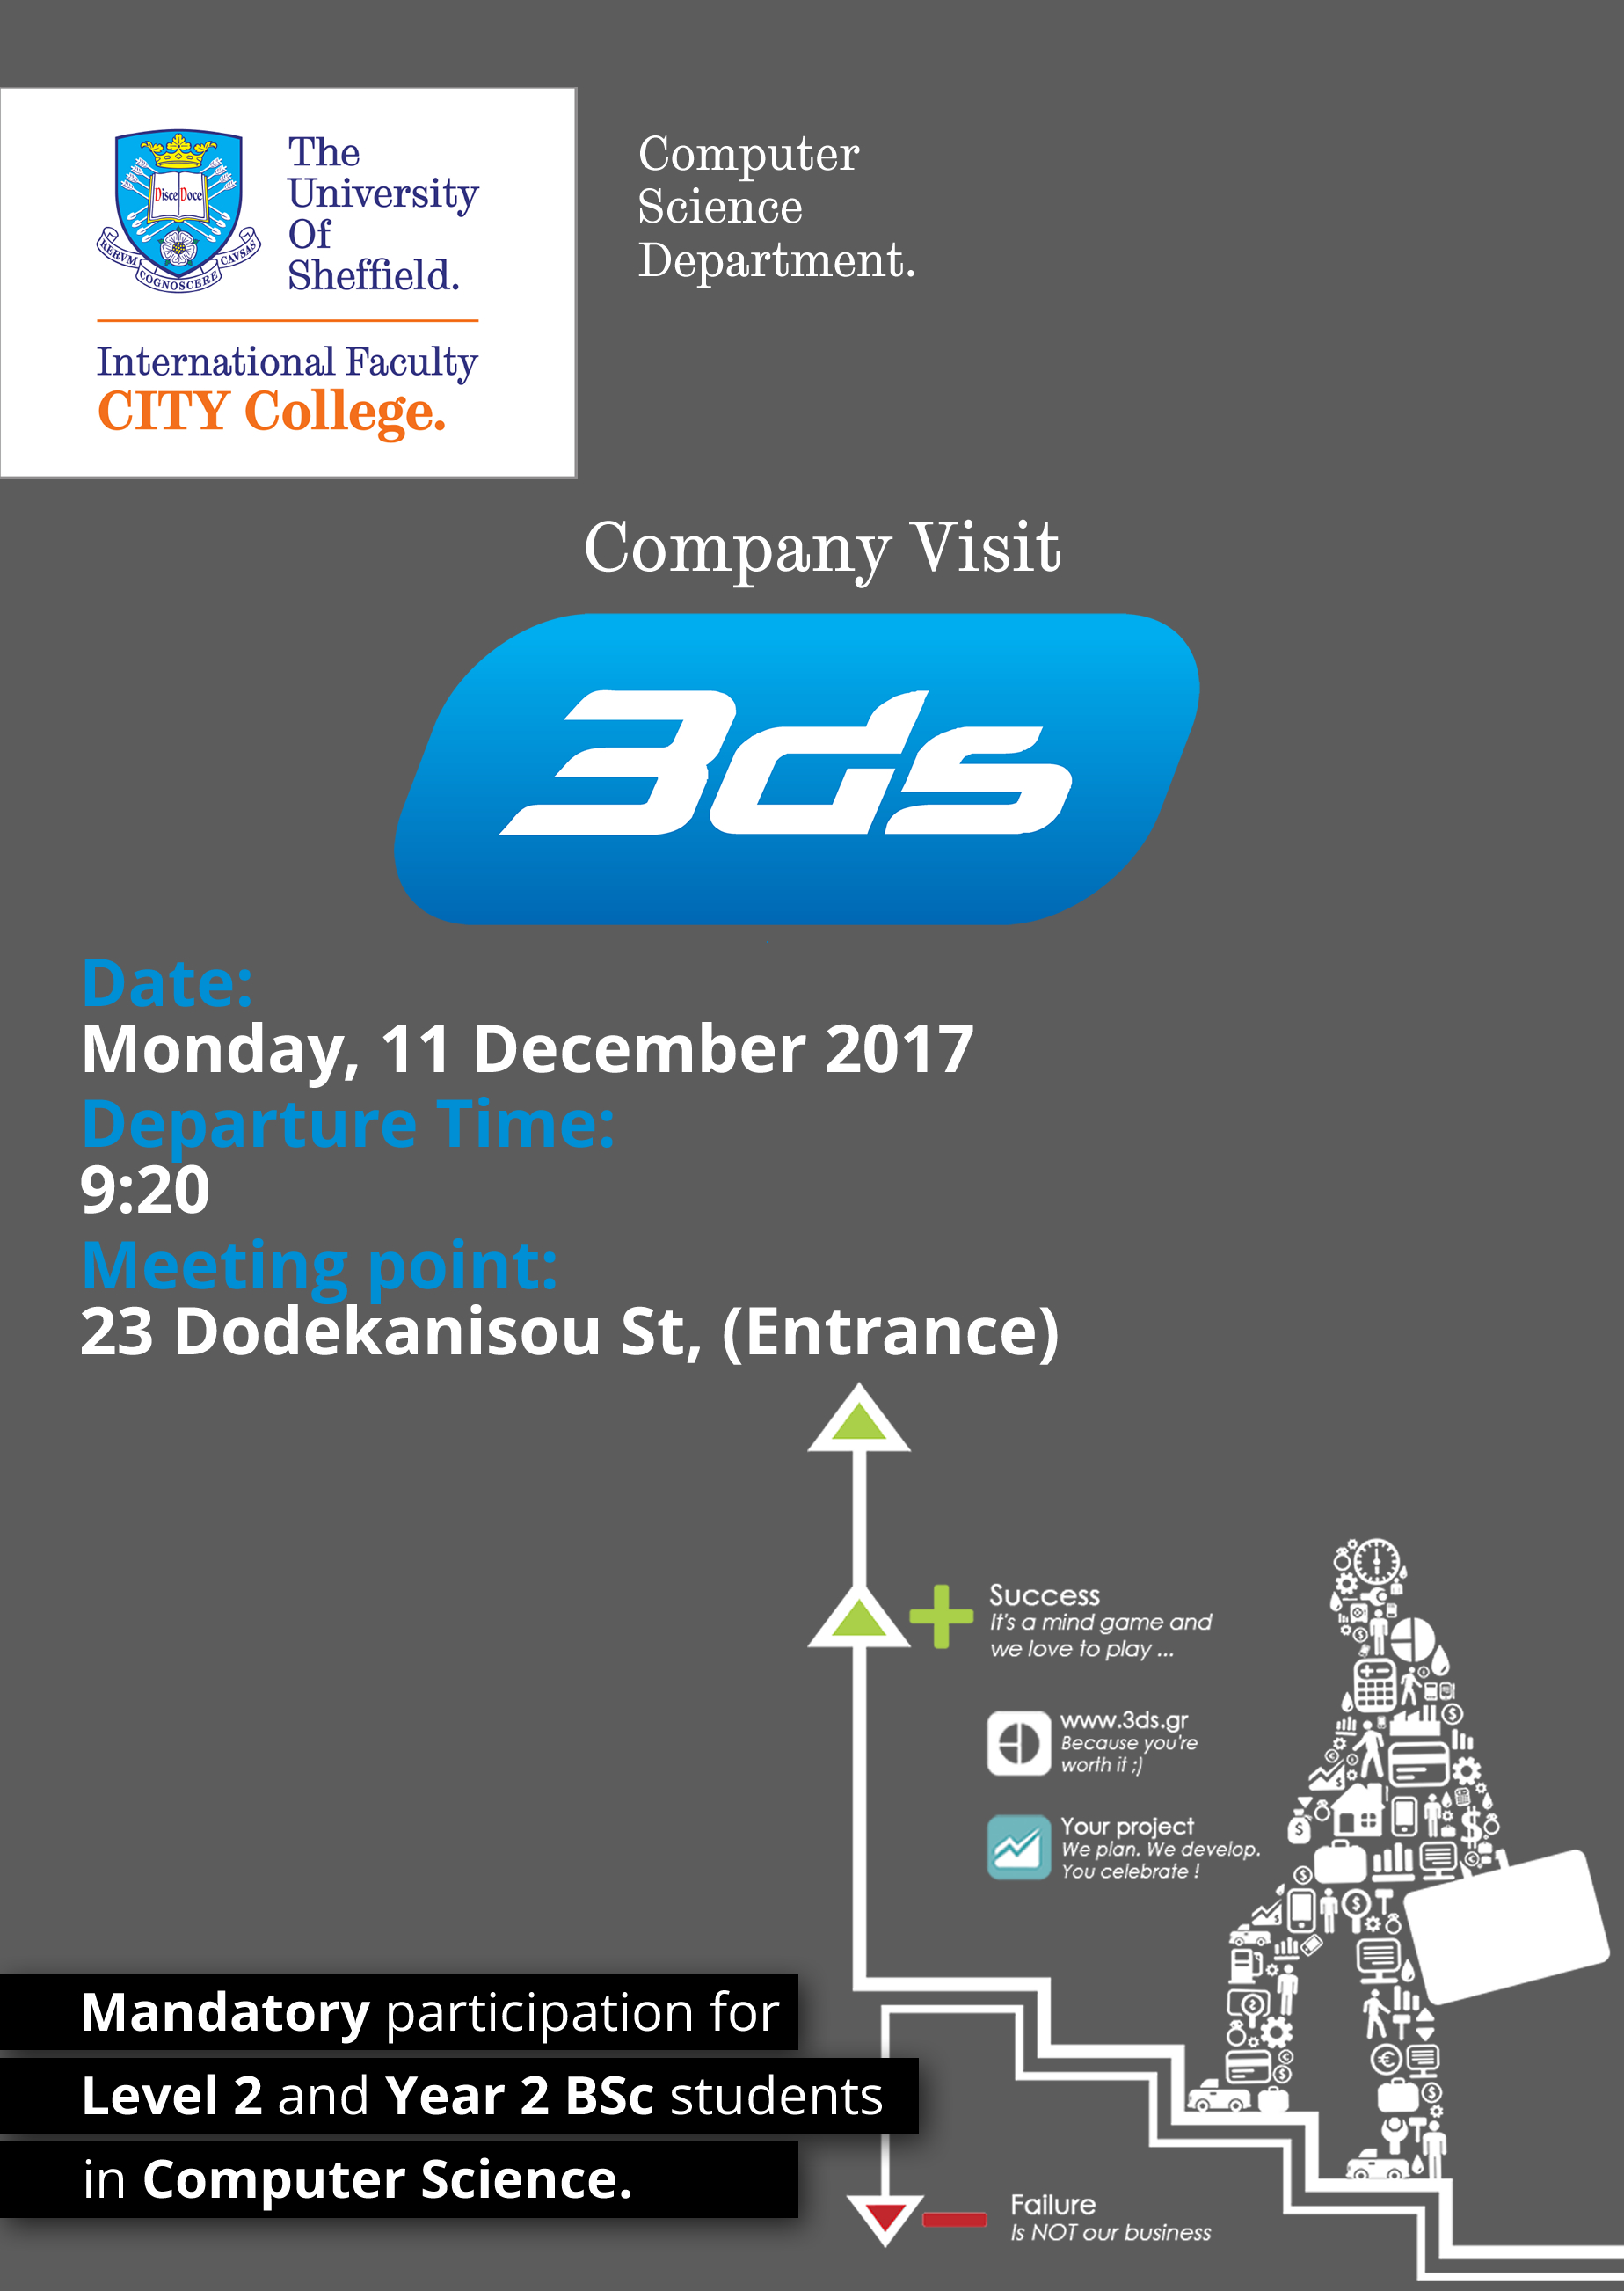 Company Visit to 3DS by the International Faculty CITY College Computer Science students